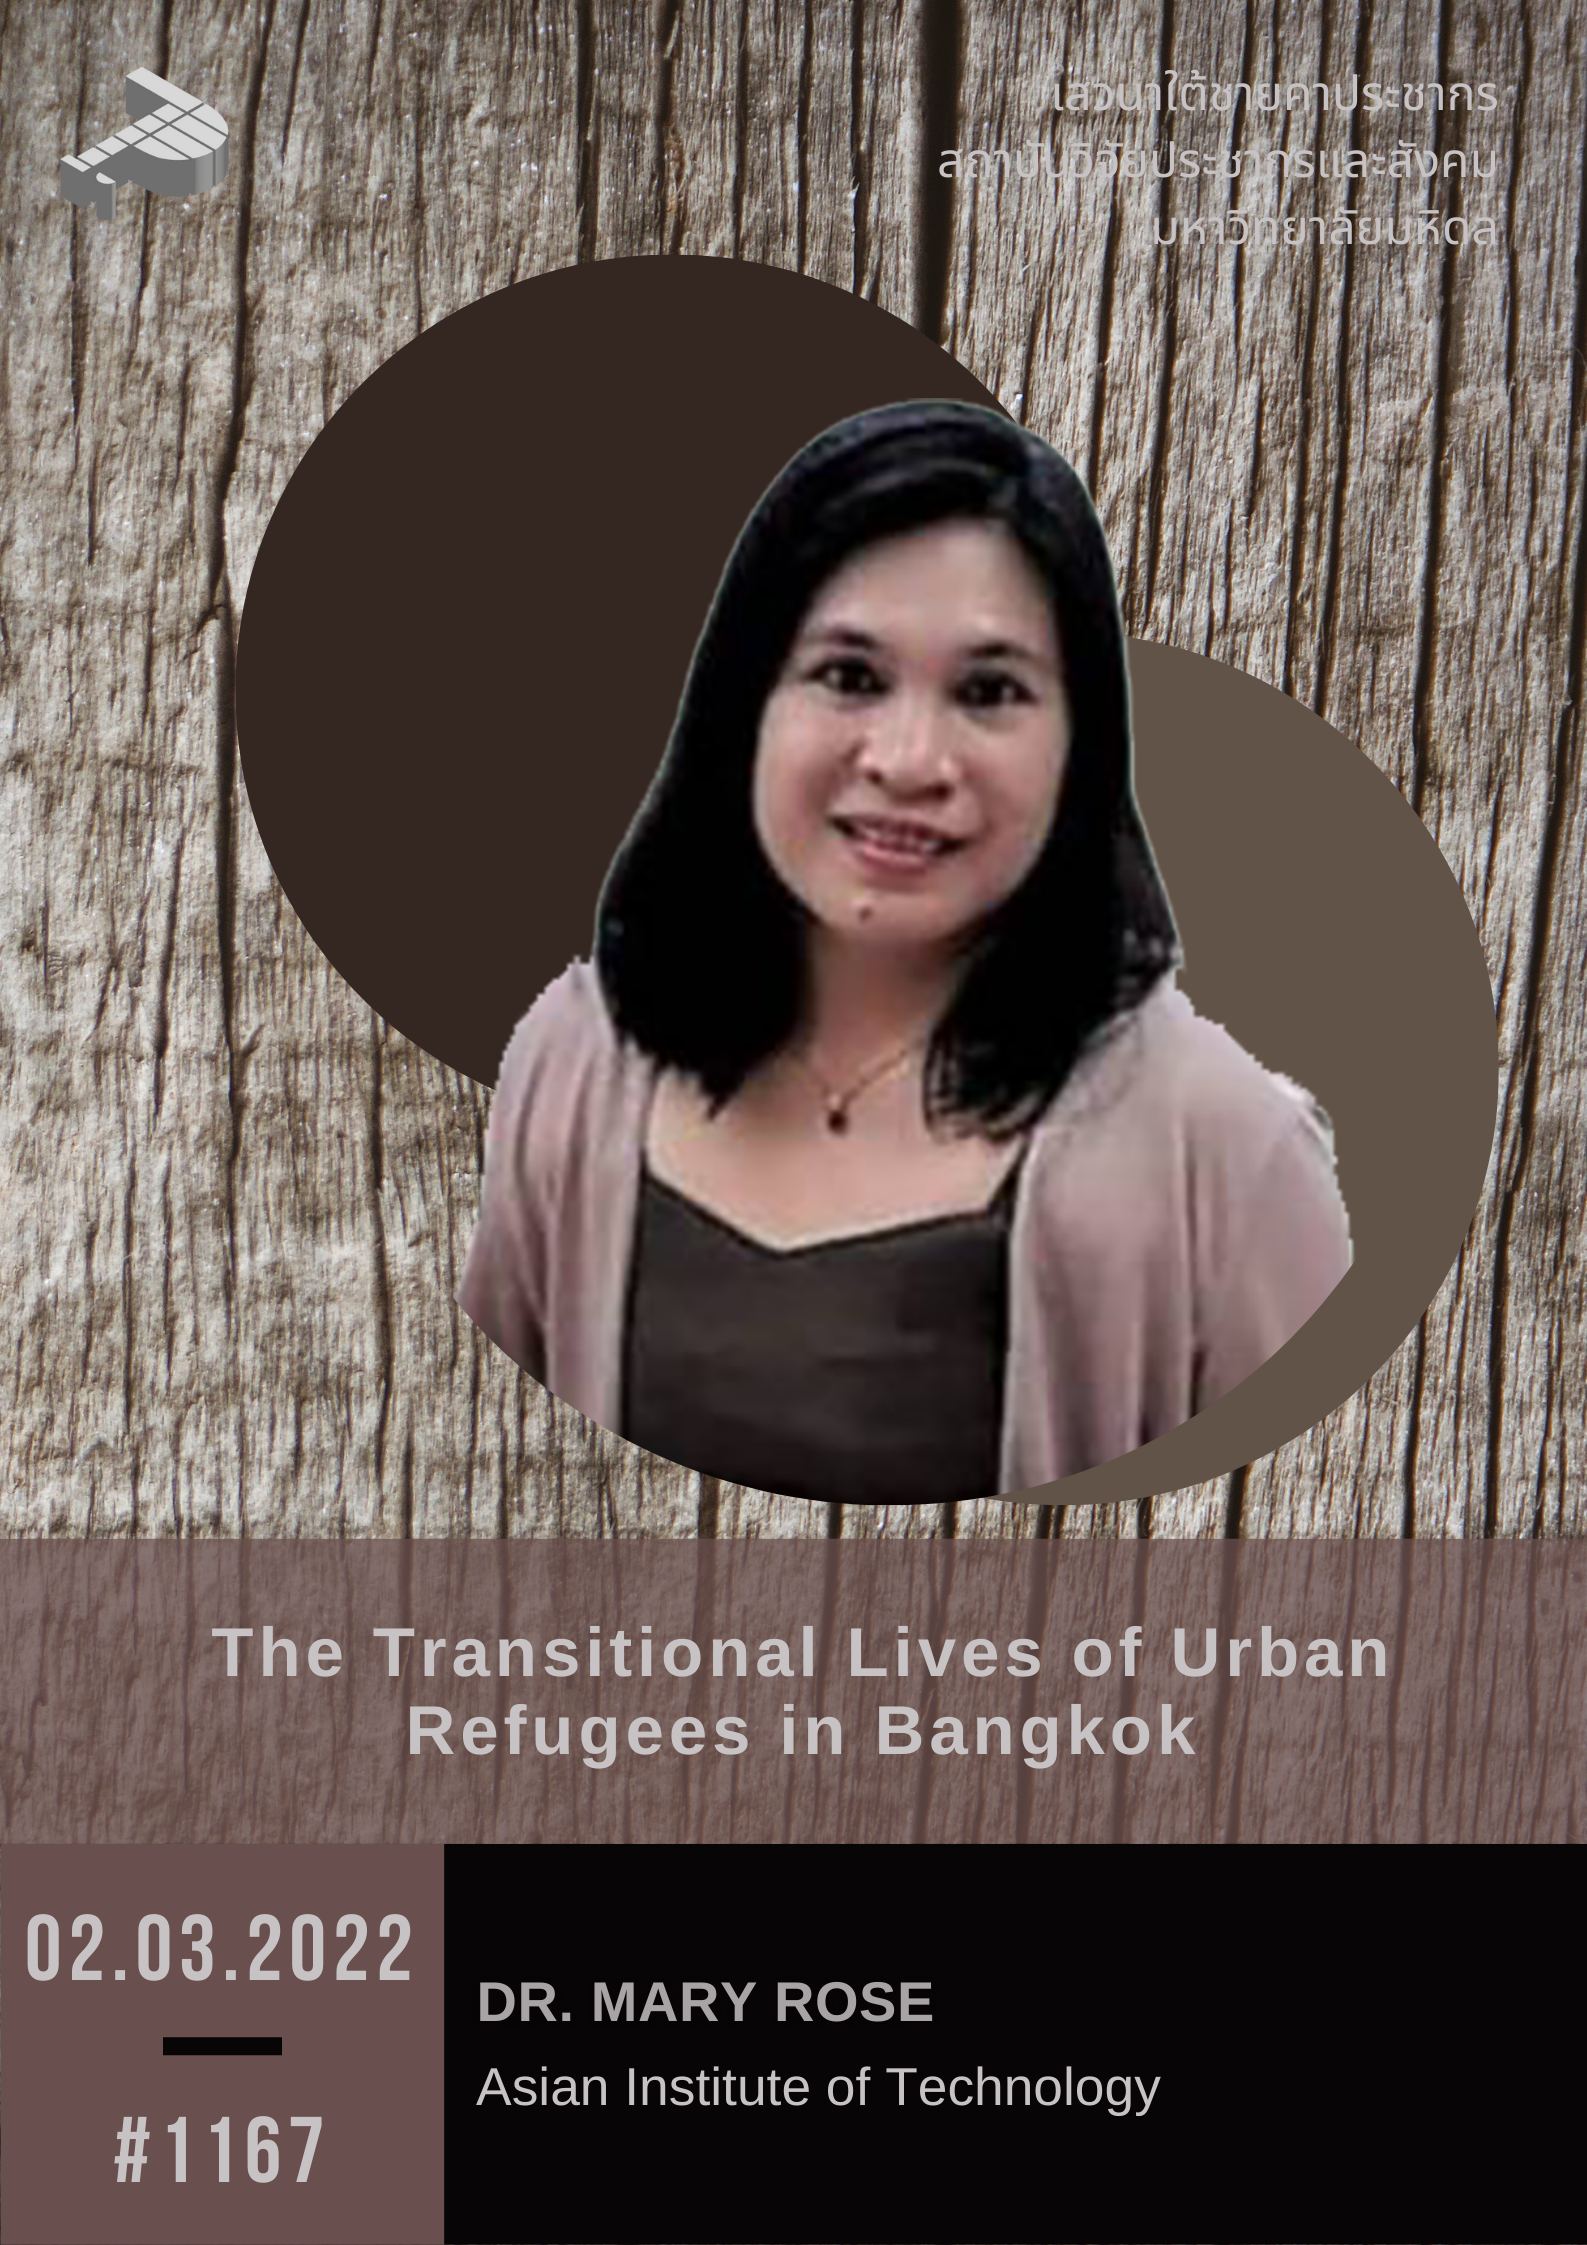 The Transitional Lives of Urban Refugees in Bangkok